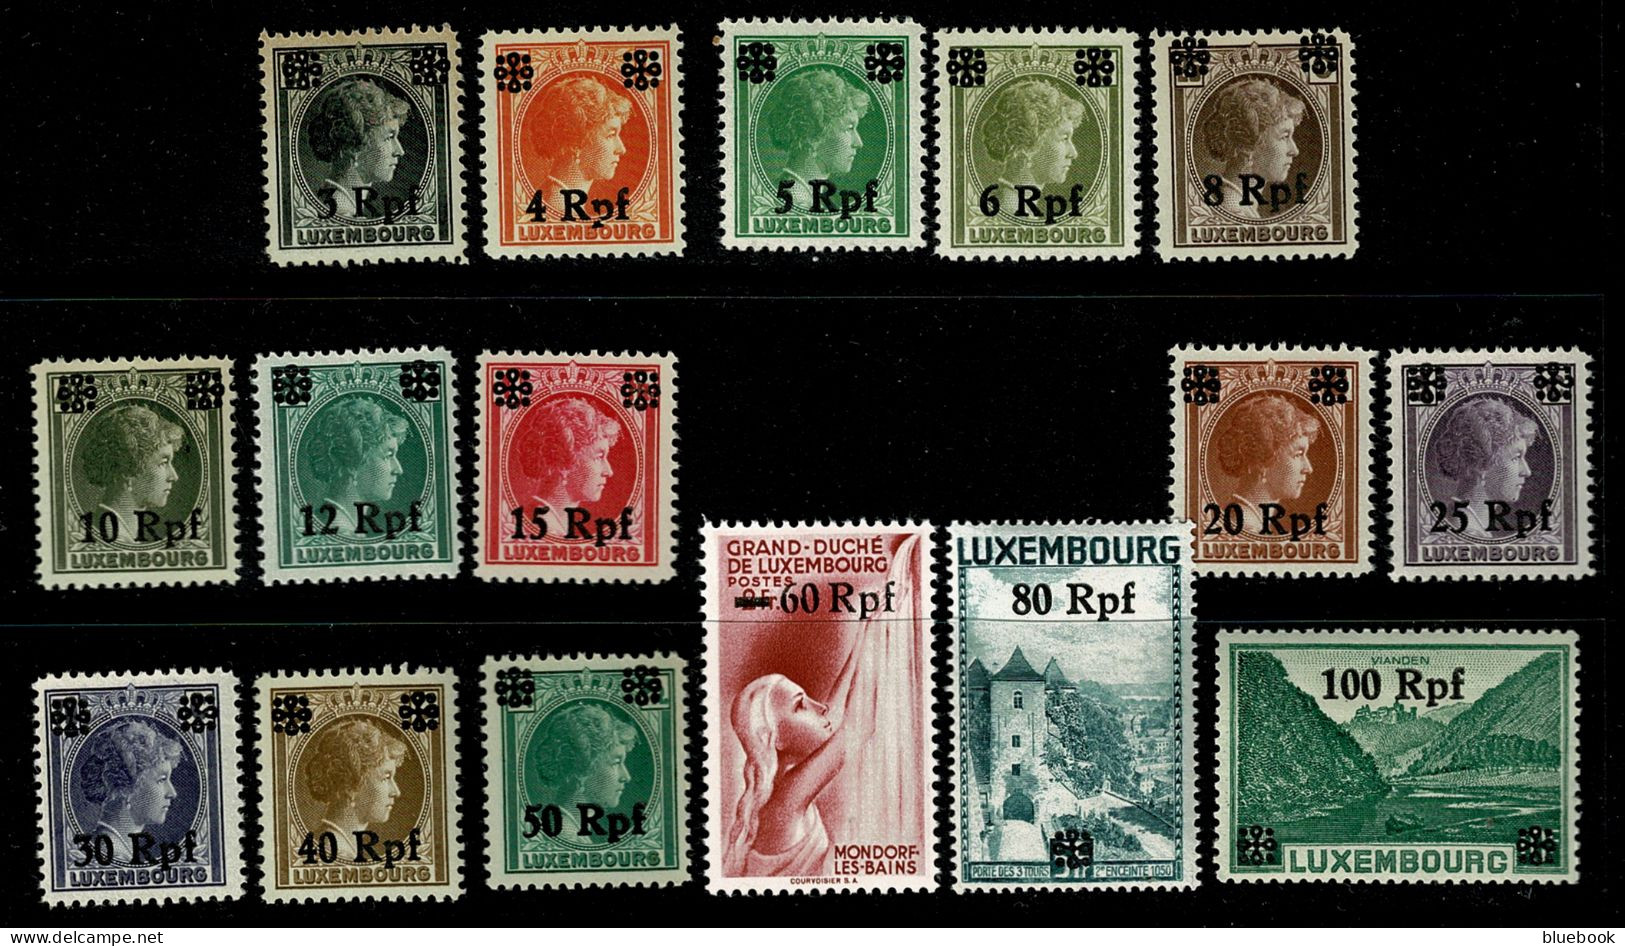 Ref 1646 - Germany Occupation Of Luxembourg - 1940 MNH Set SG 413-428 - 1940-1944 German Occupation